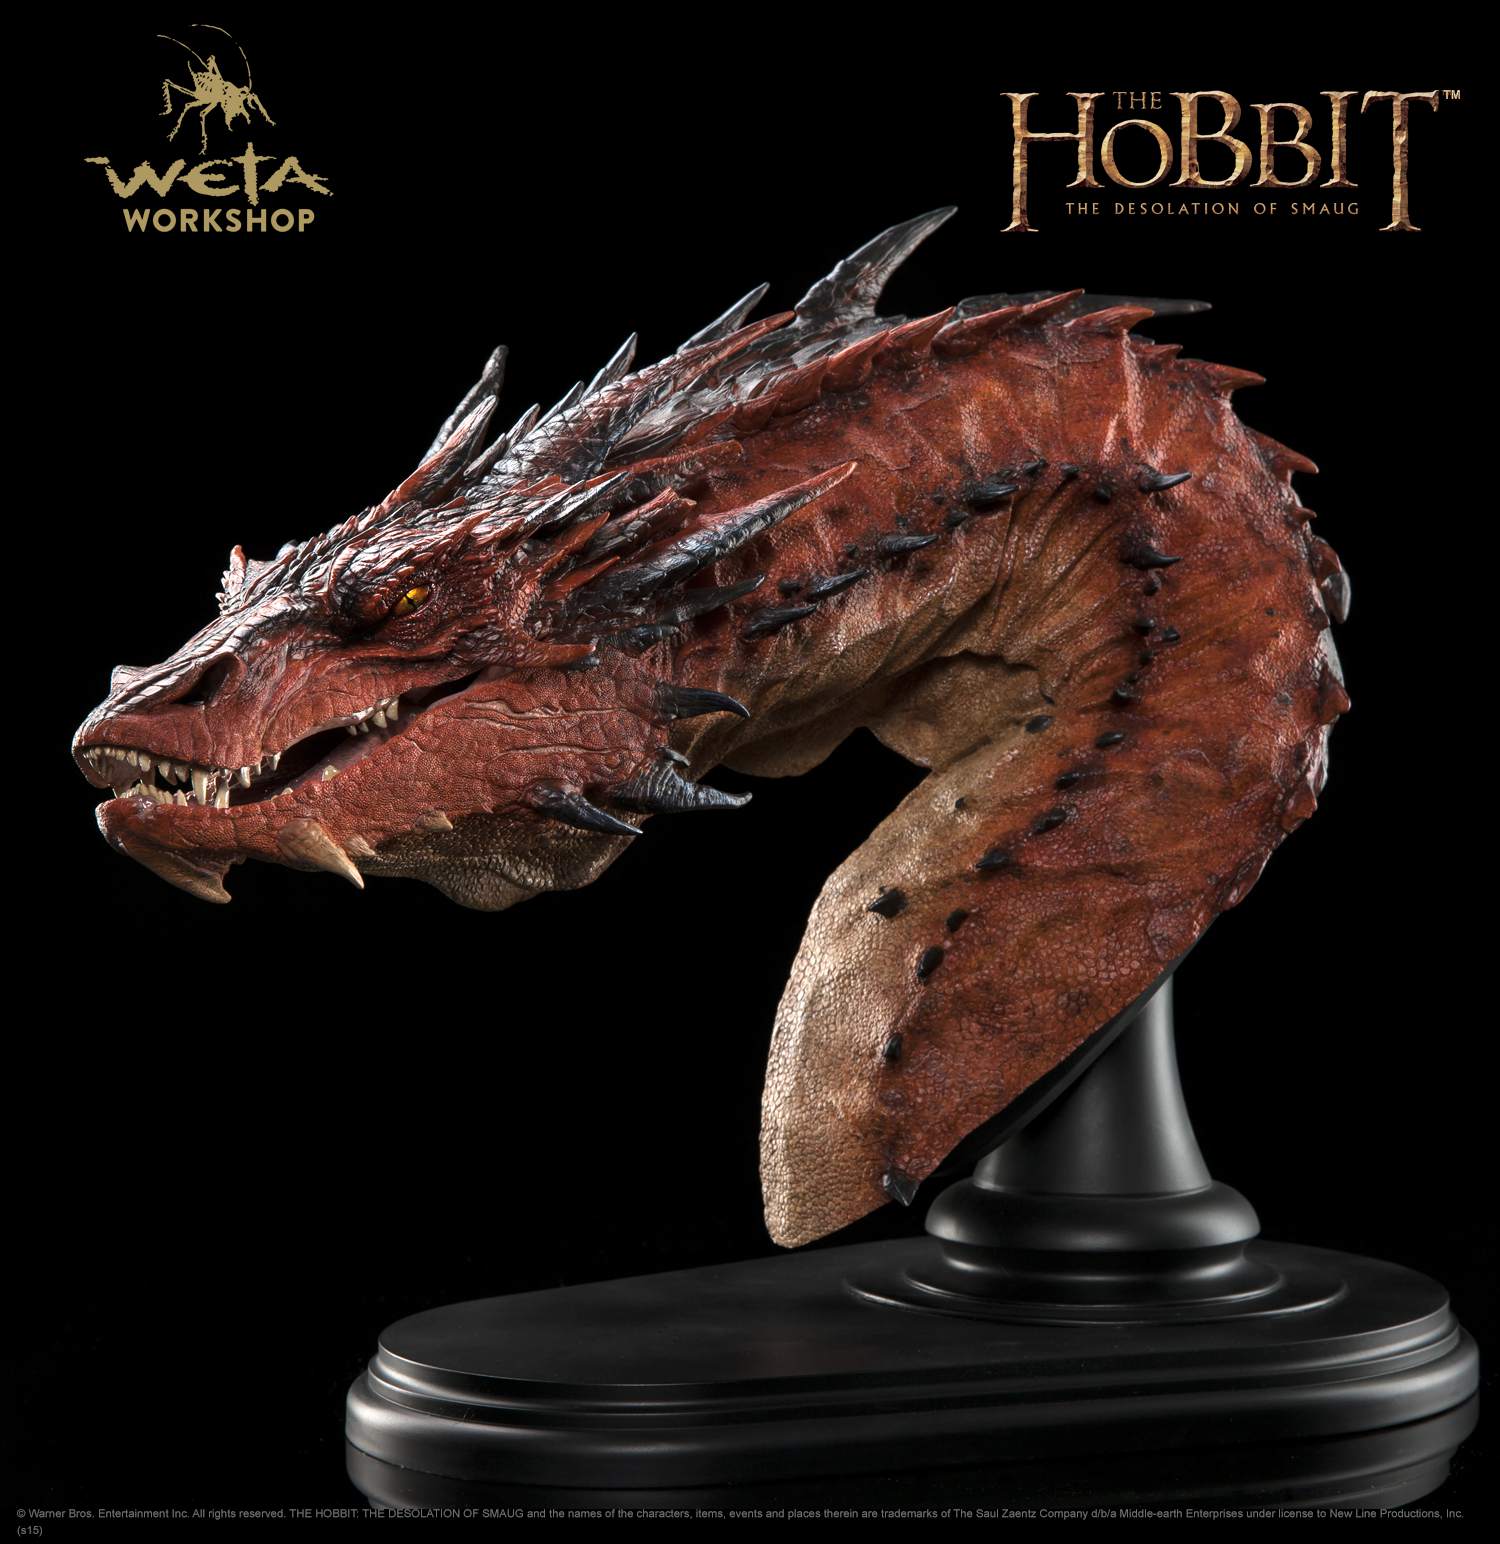 Hobbit Smaug bust by Weta